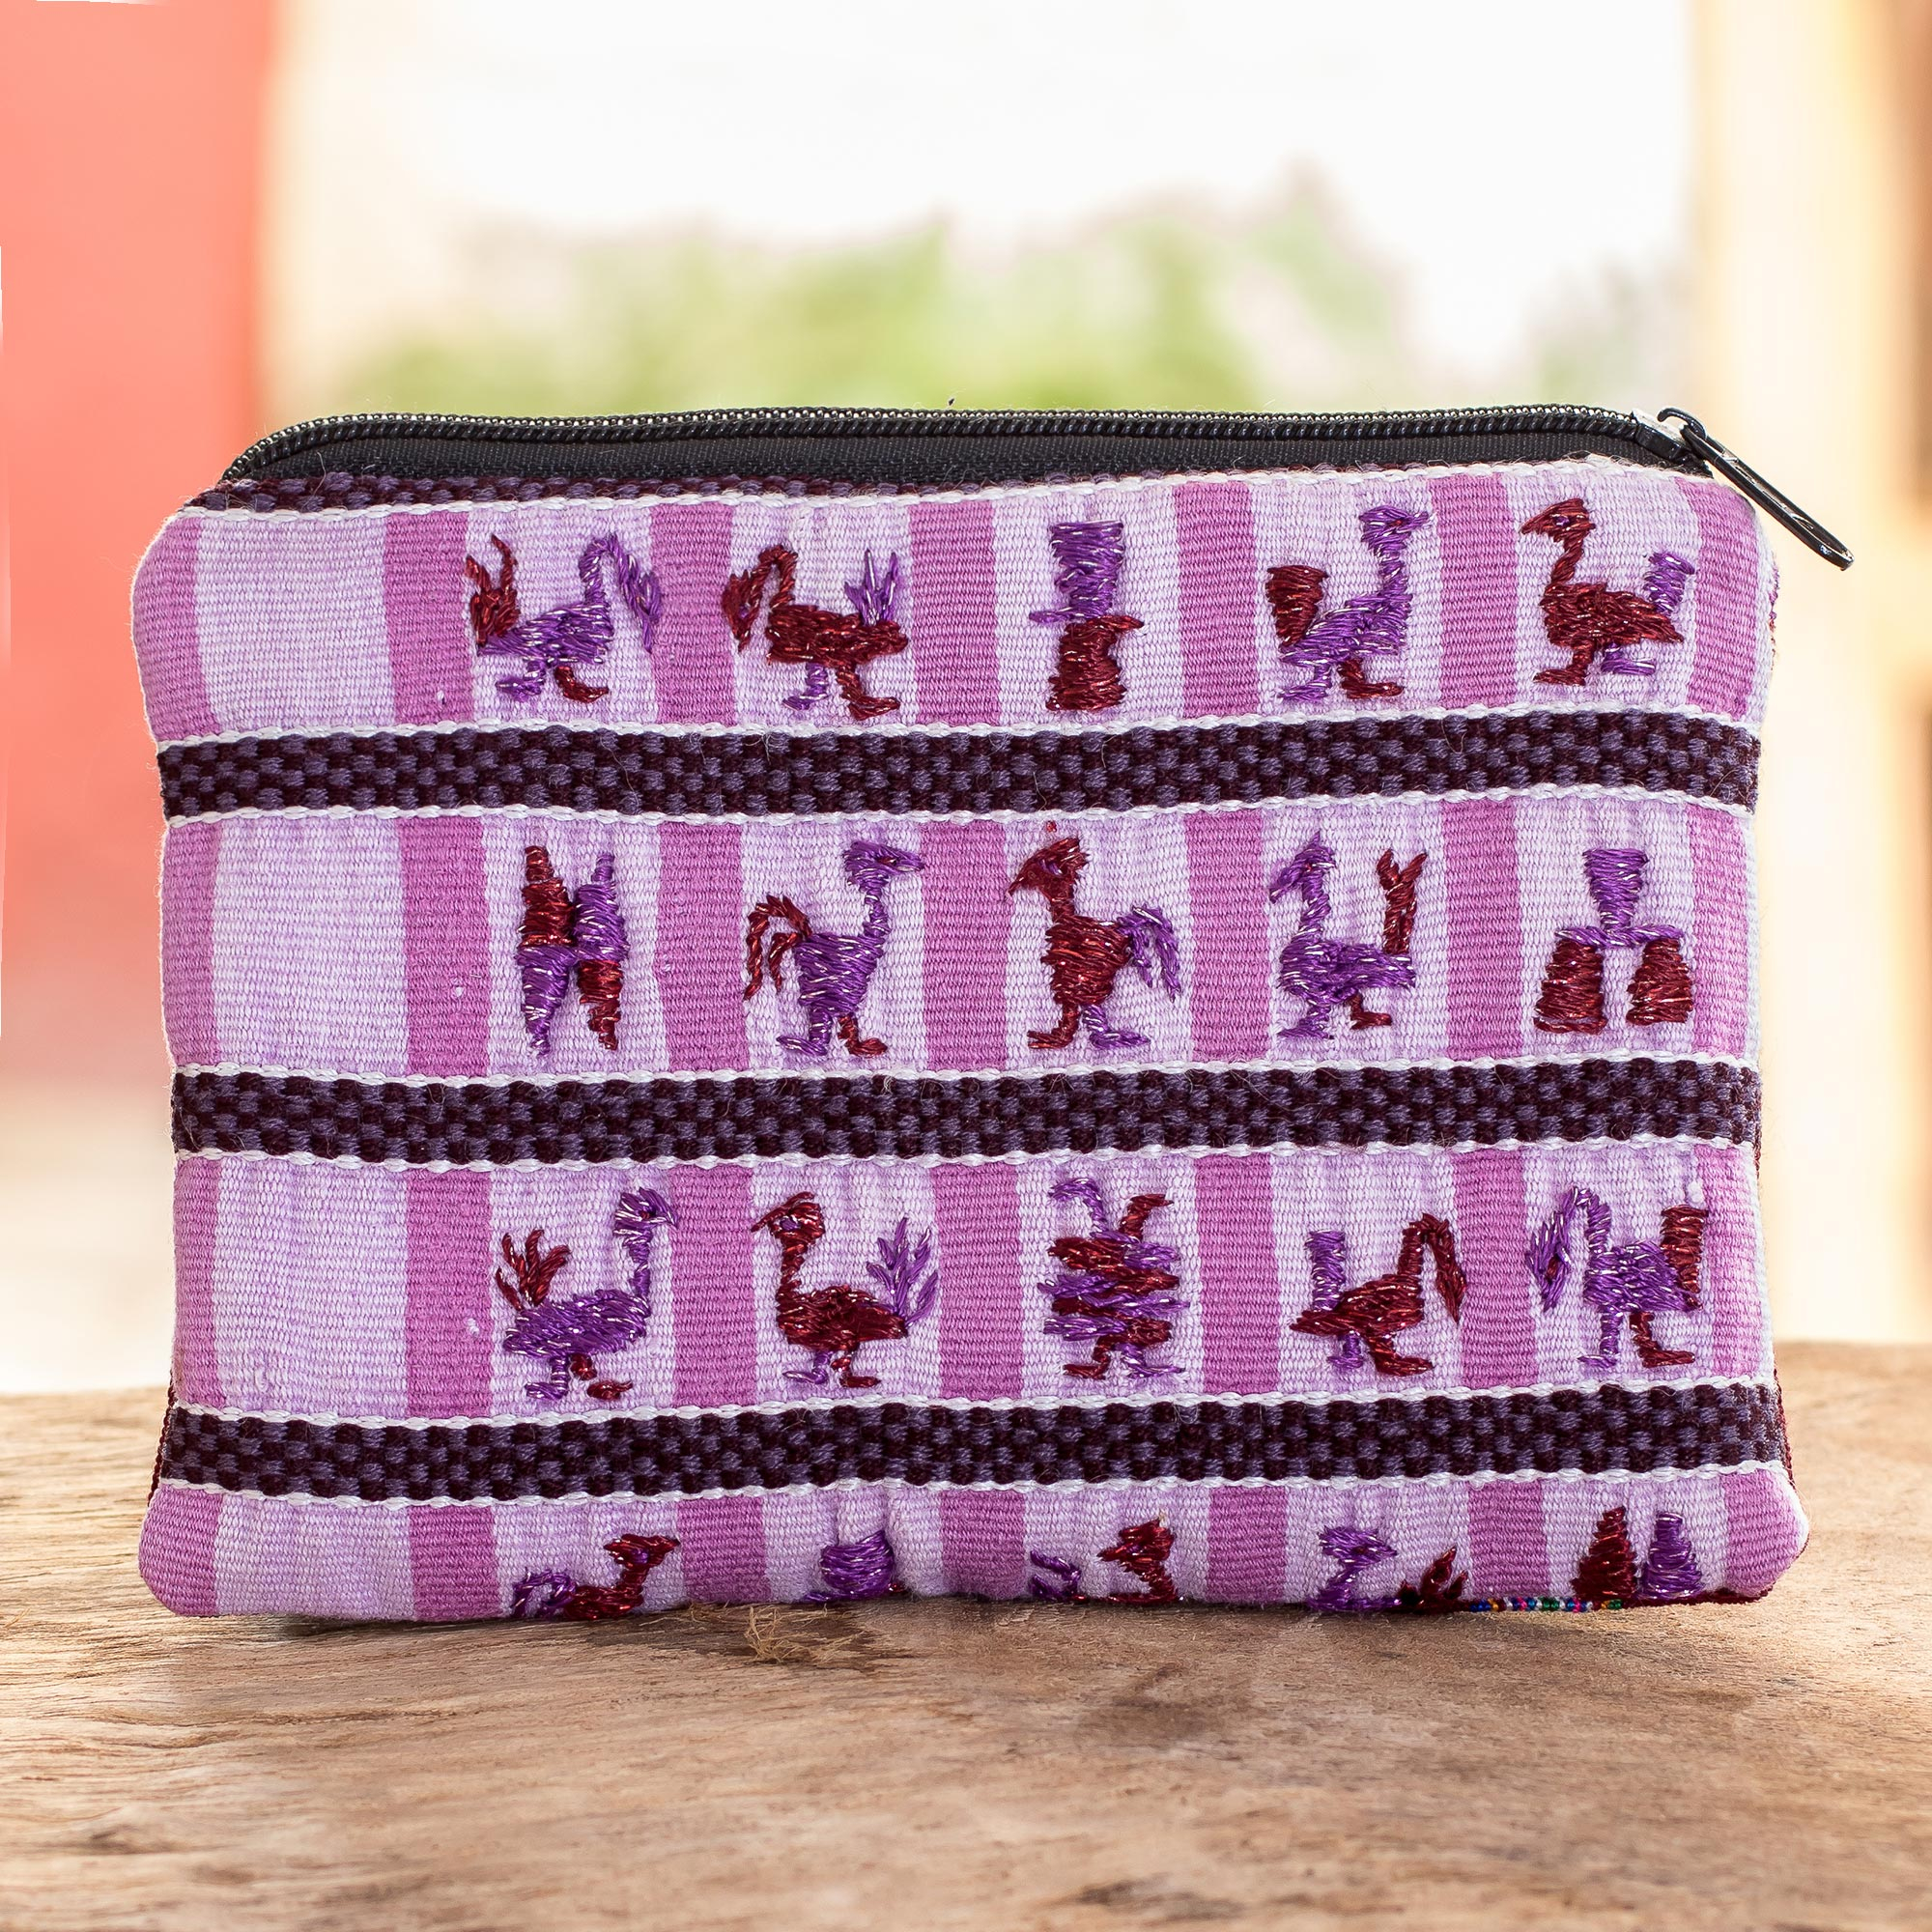 coin purse bag gift purse pouch mom sister friend native handmade  embroidered purple black mini fair trade hand stitch Guatemala Guatemala  velvet cute flowers fashion patters wallet cellphone money fashion fall  colors